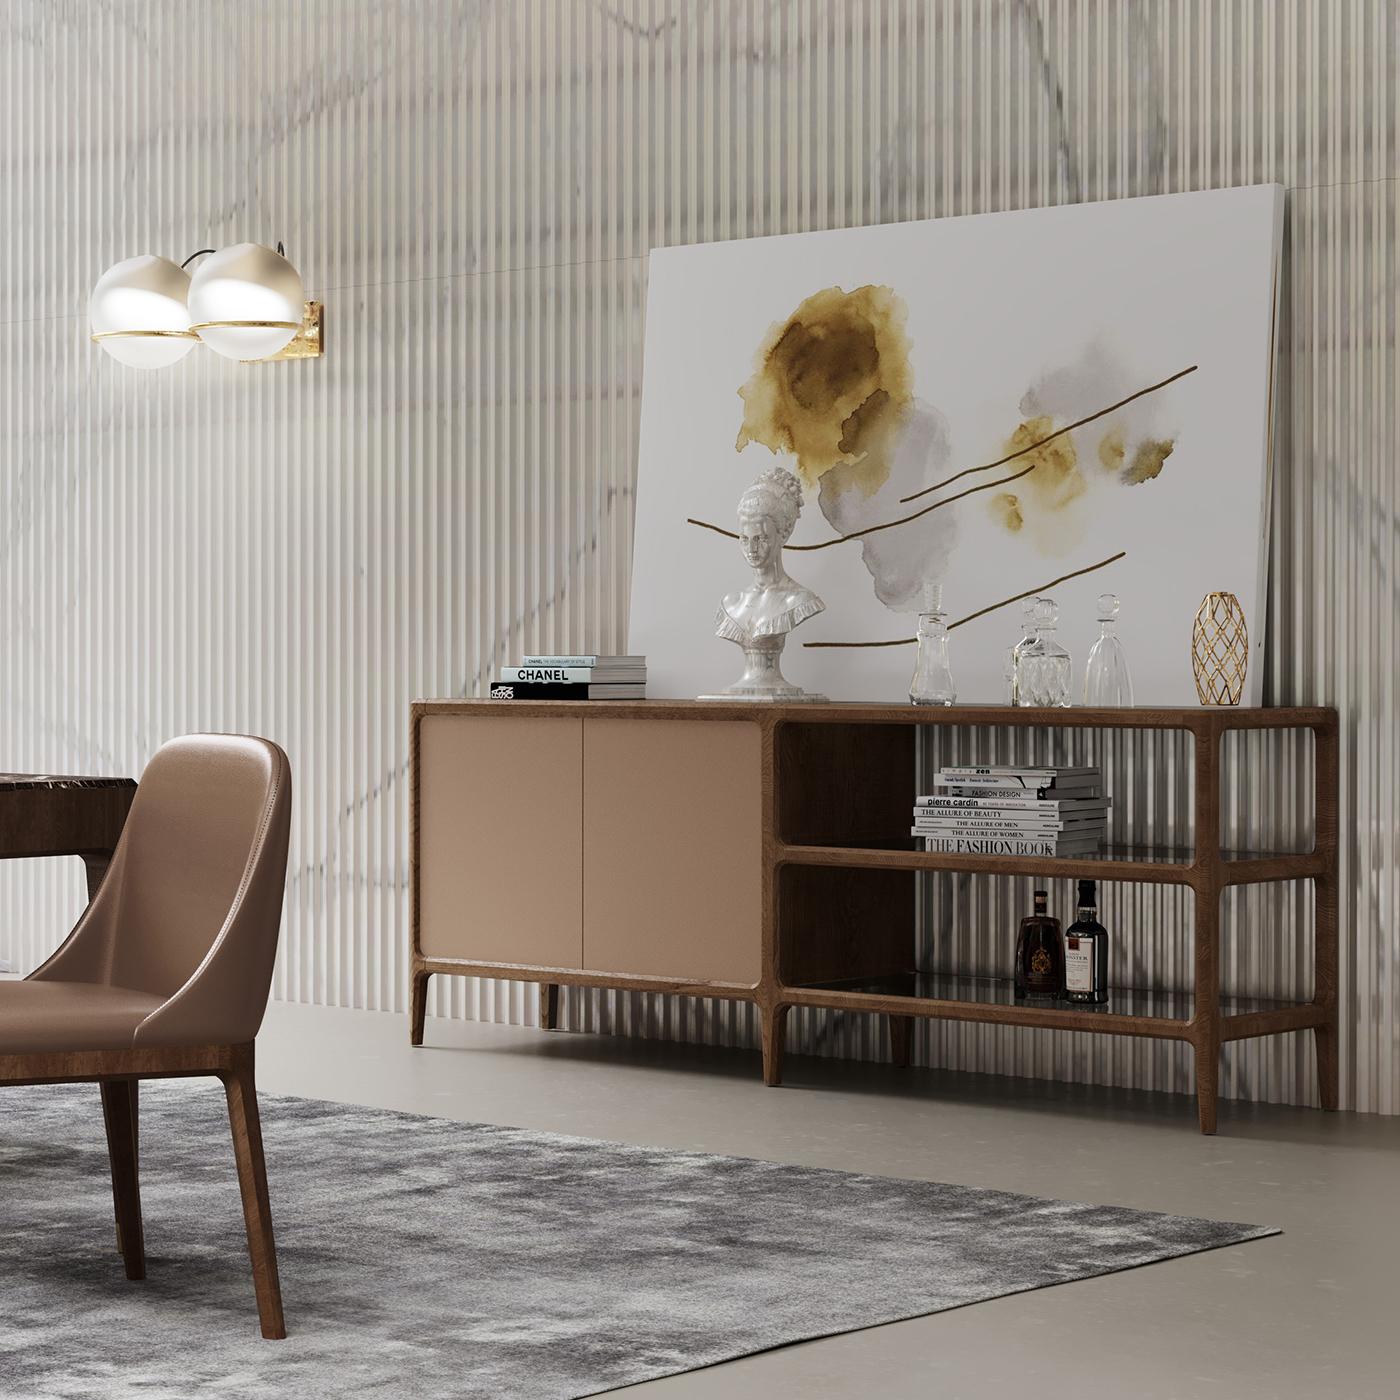 Bellagio is a new collection characterized by well-defined lines, wisely worked, which aims to satisfy the most sophisticated tastes, presenting itself with refined objects preciously finished in every detail. The sideboard in ash wood features two